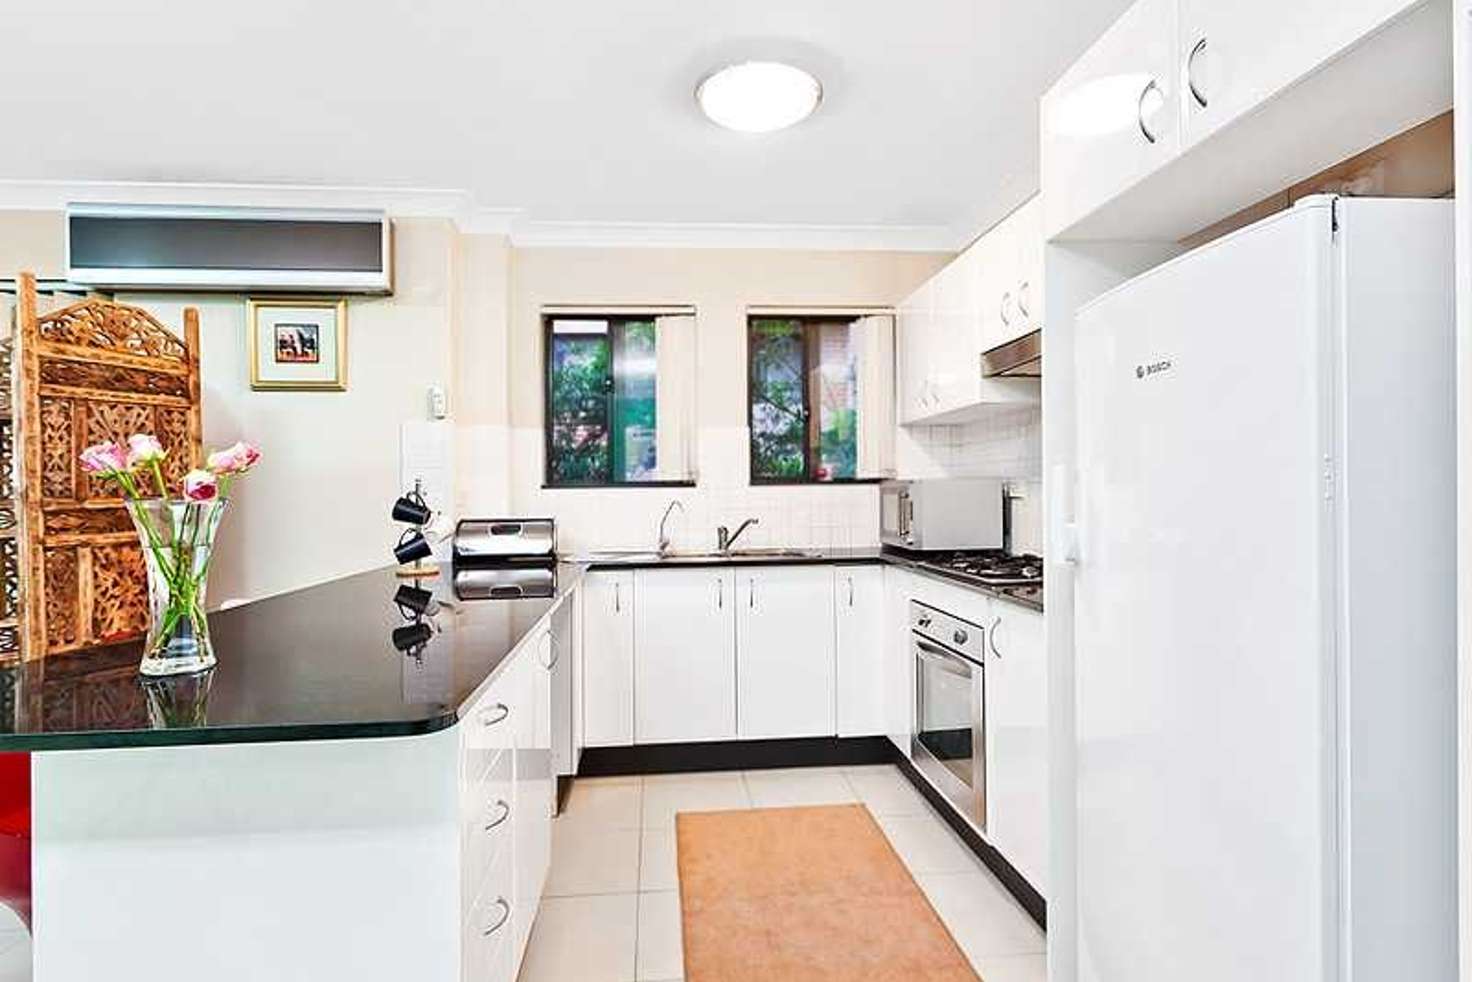 Main view of Homely apartment listing, 3/123-125 Arthur Street, Strathfield NSW 2135